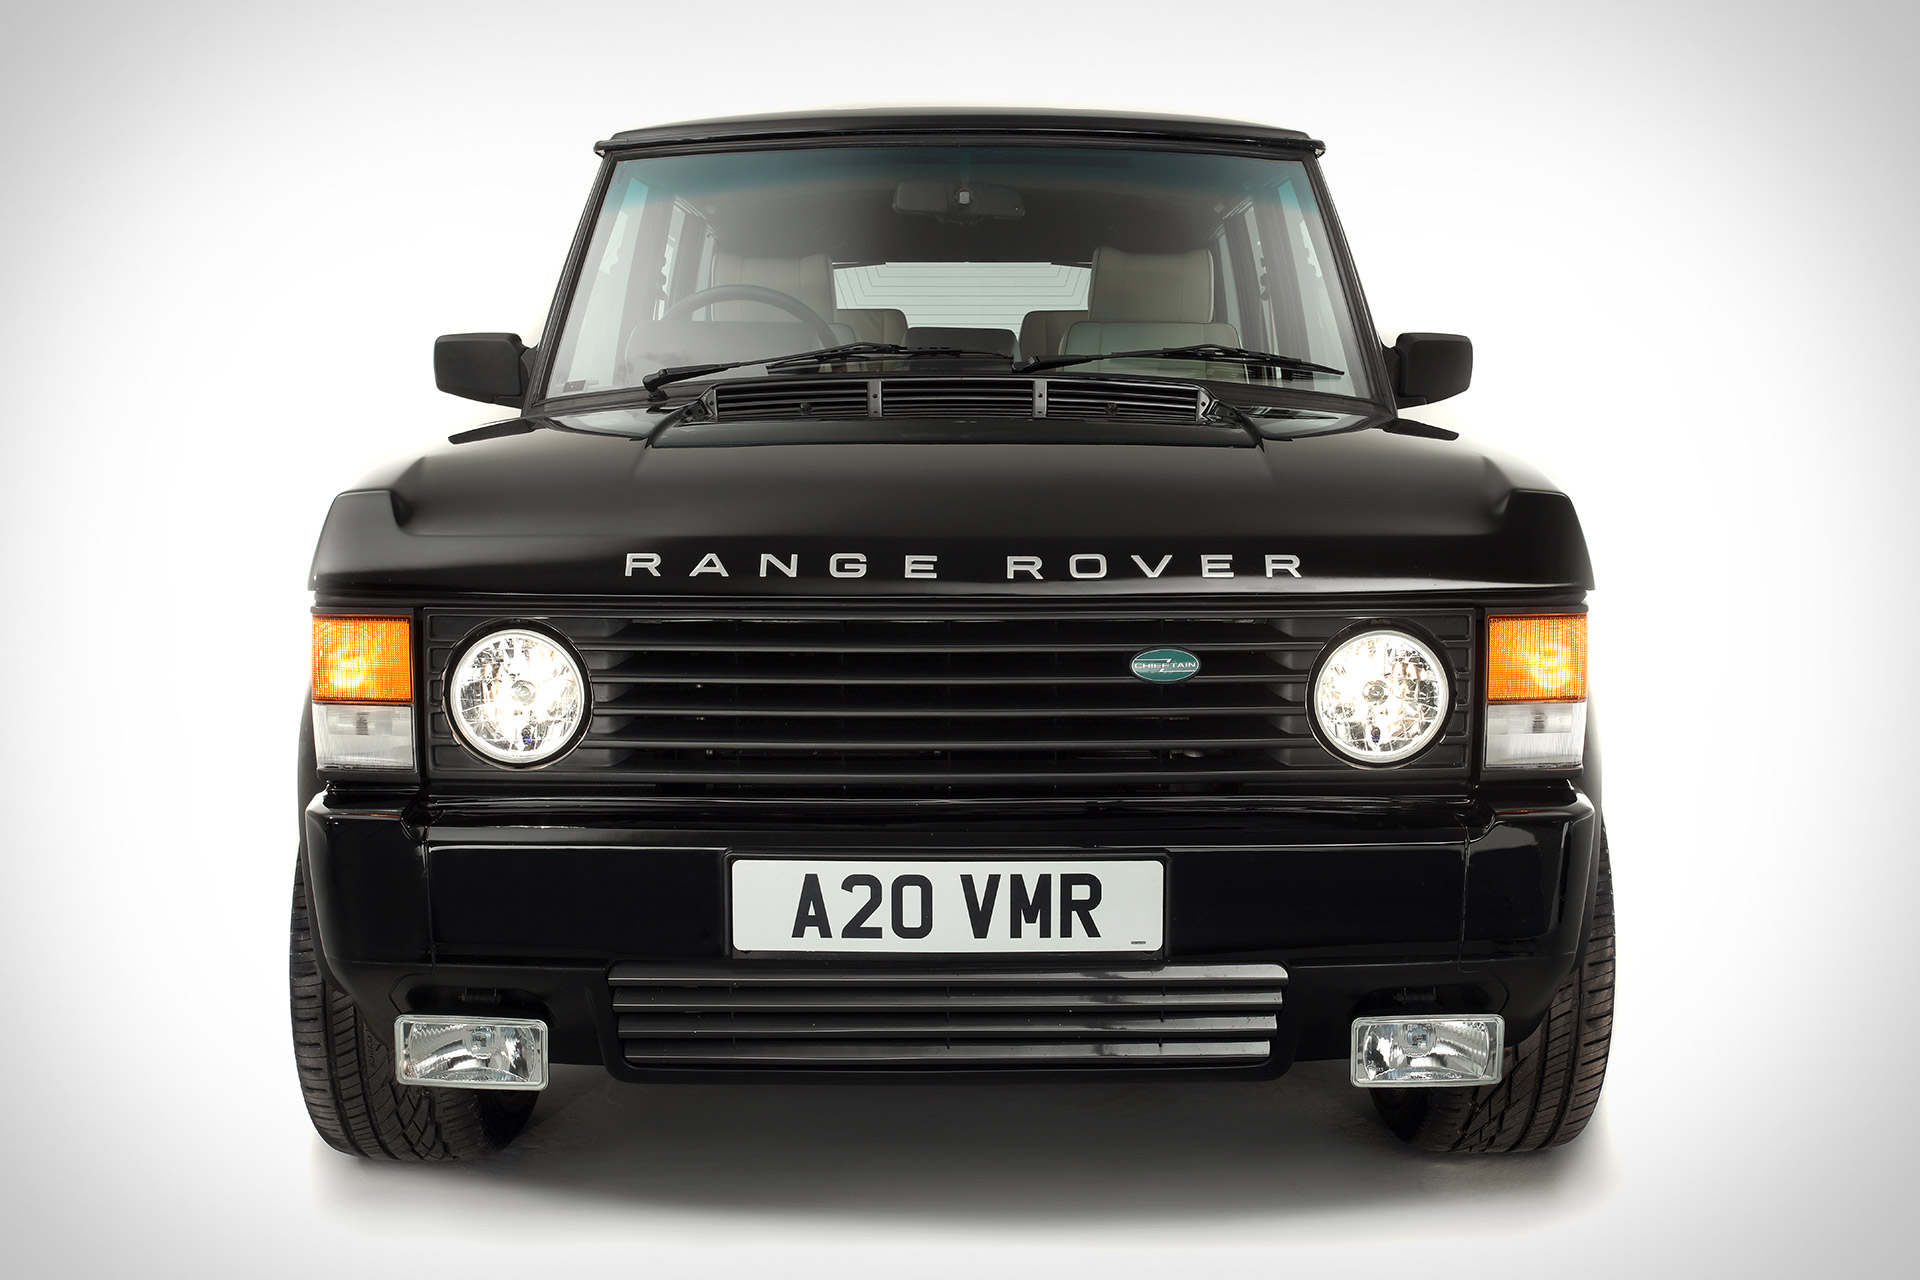 Range Rover Chieftain | Uncrate